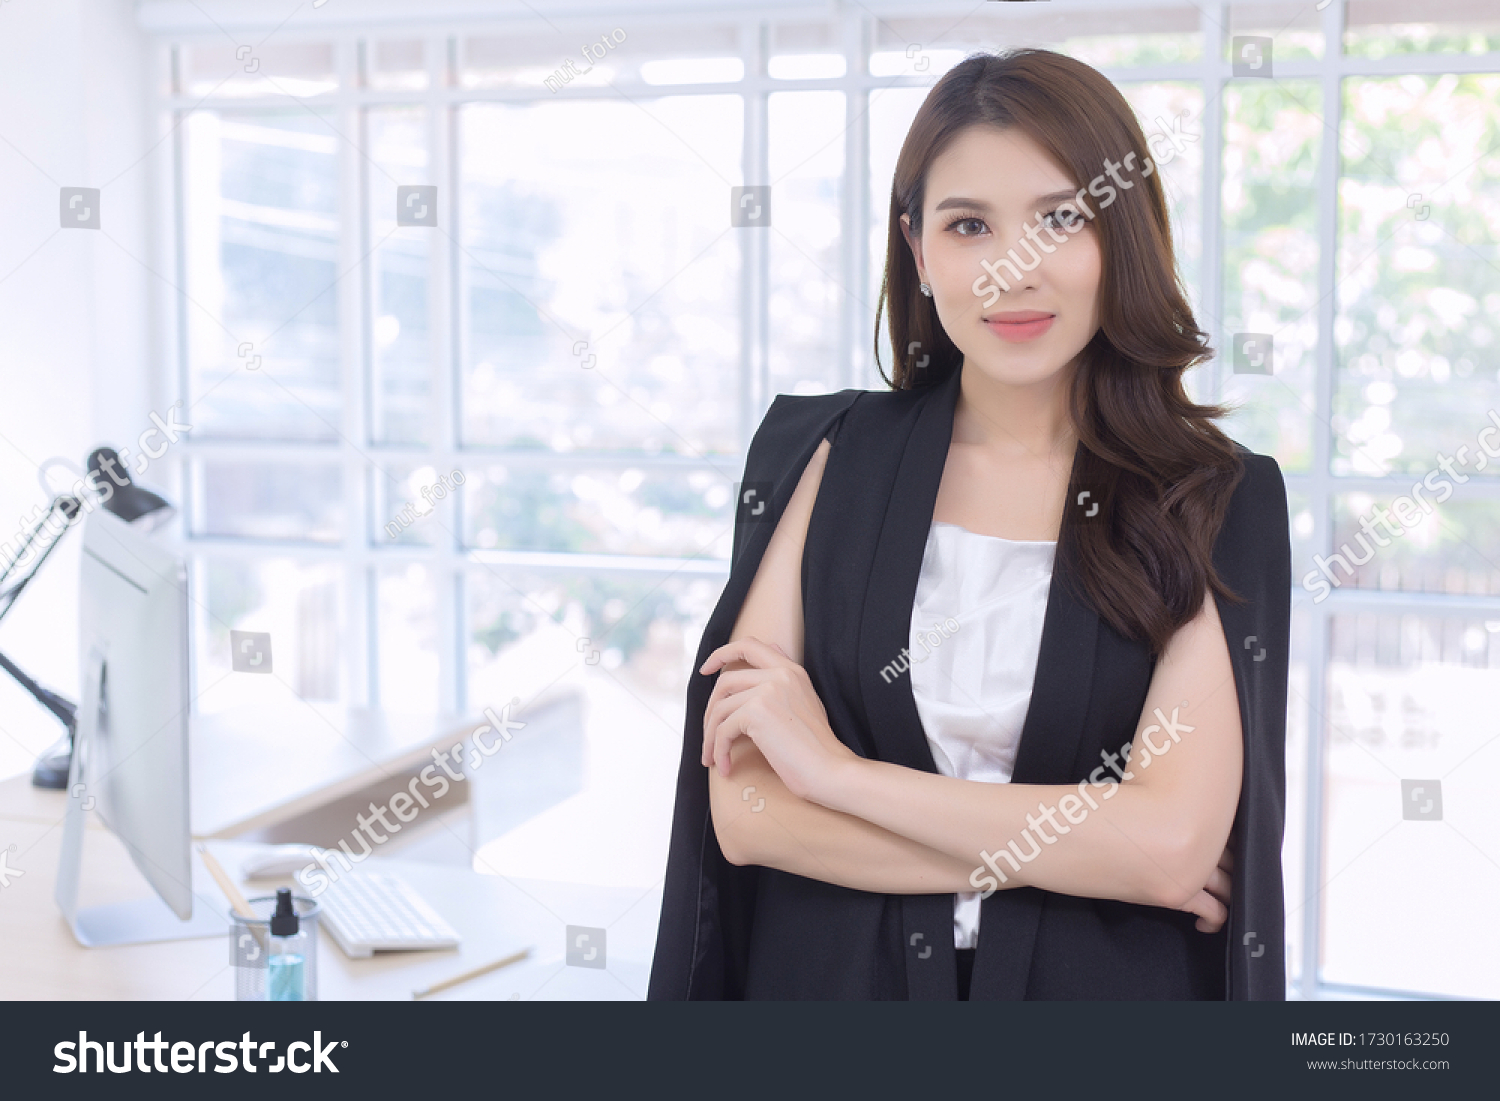 Work from home. Beautiful office lady standing and smiling at work happily. #1730163250